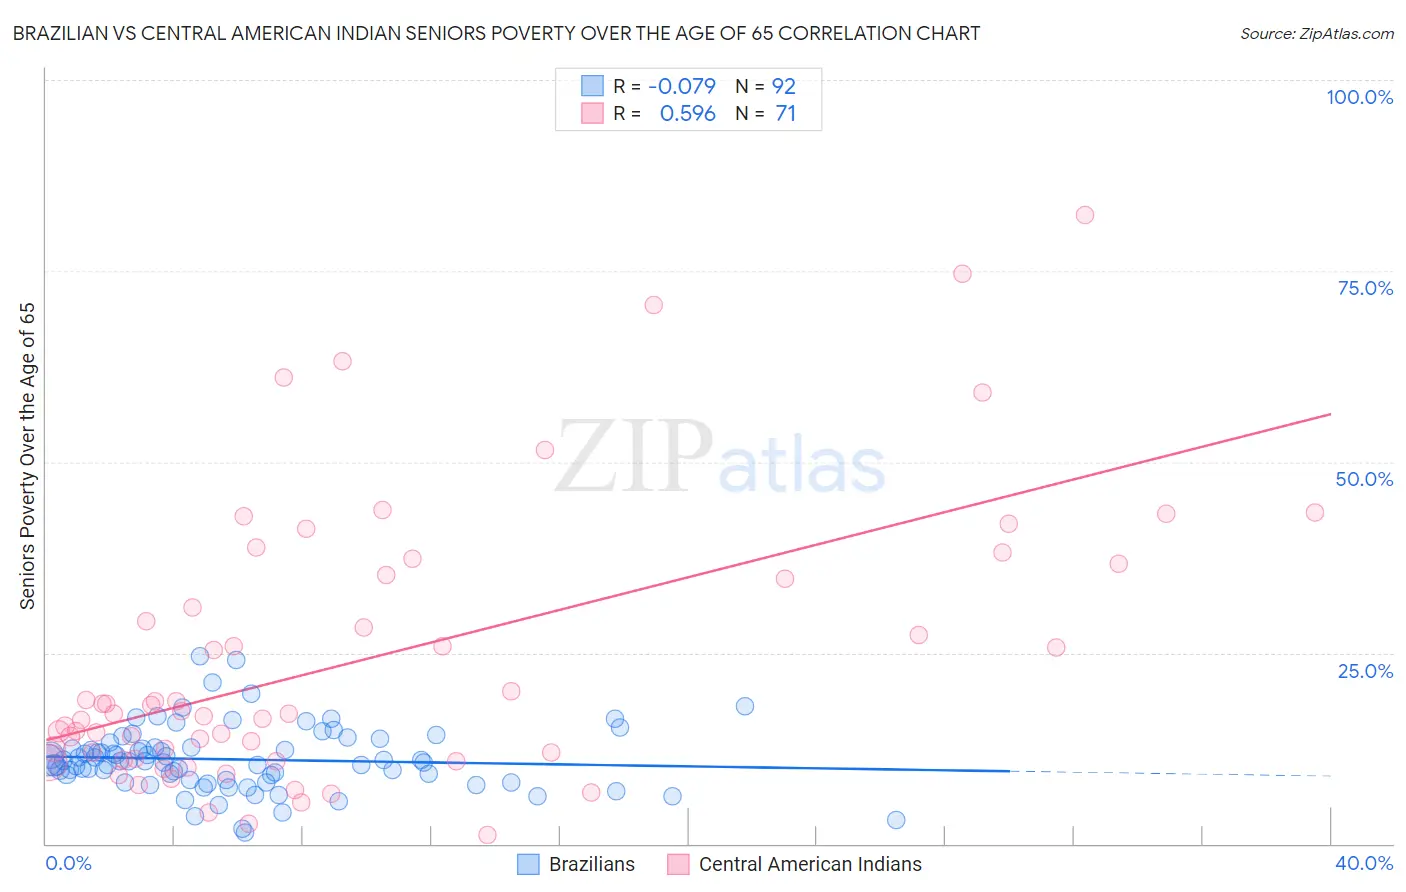 Brazilian vs Central American Indian Seniors Poverty Over the Age of 65